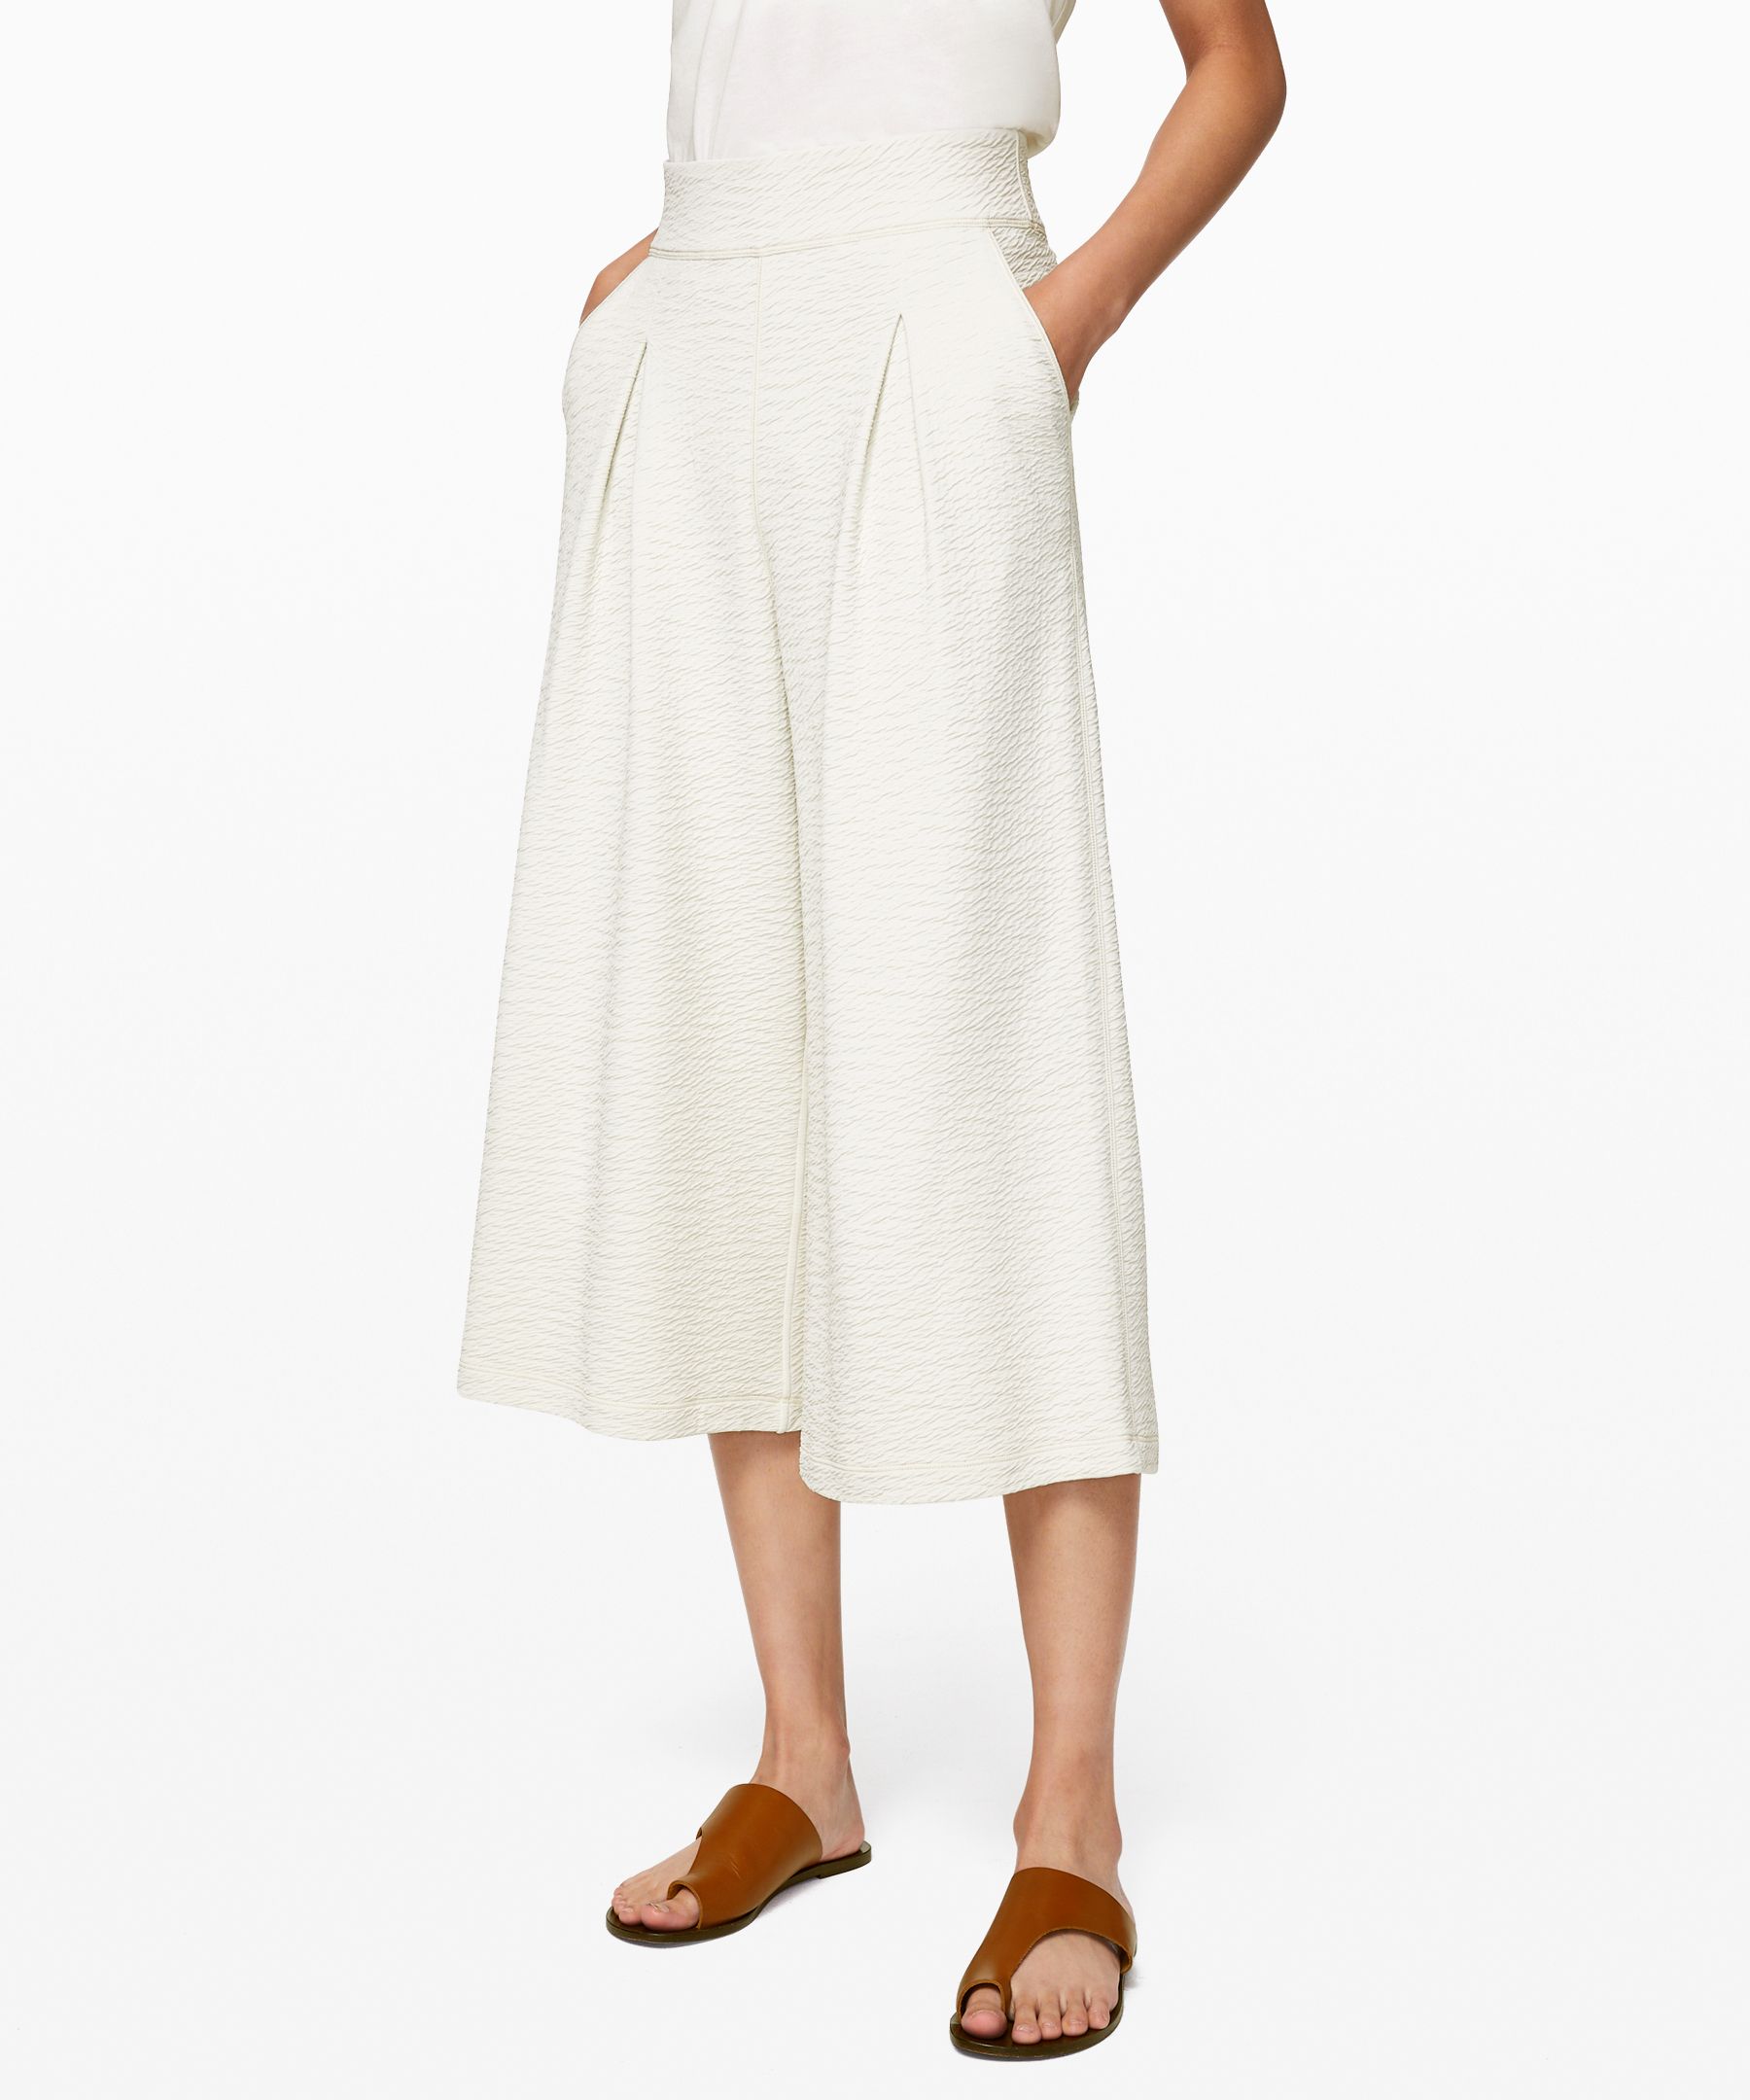 Lululemon Can You Feel The Pleat Crop In Light Ivory